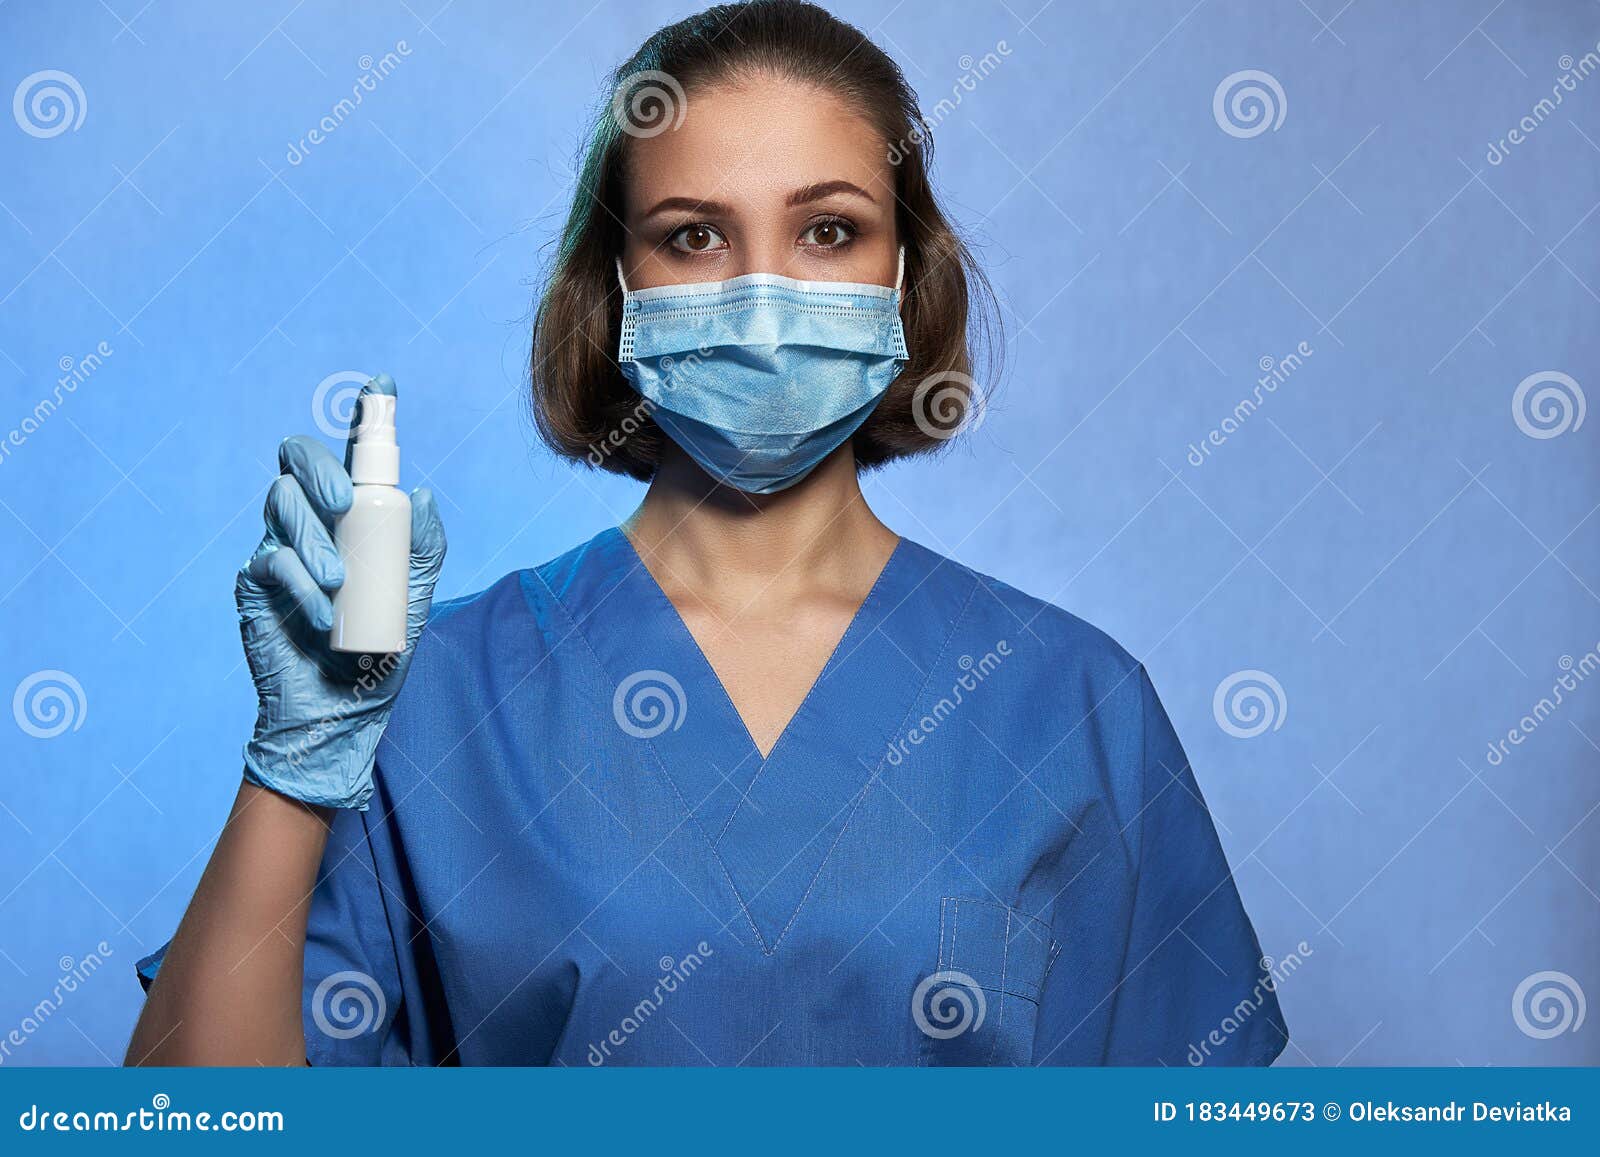 Medic in Protective Mask and Medical Gloves with Bottle of an ...